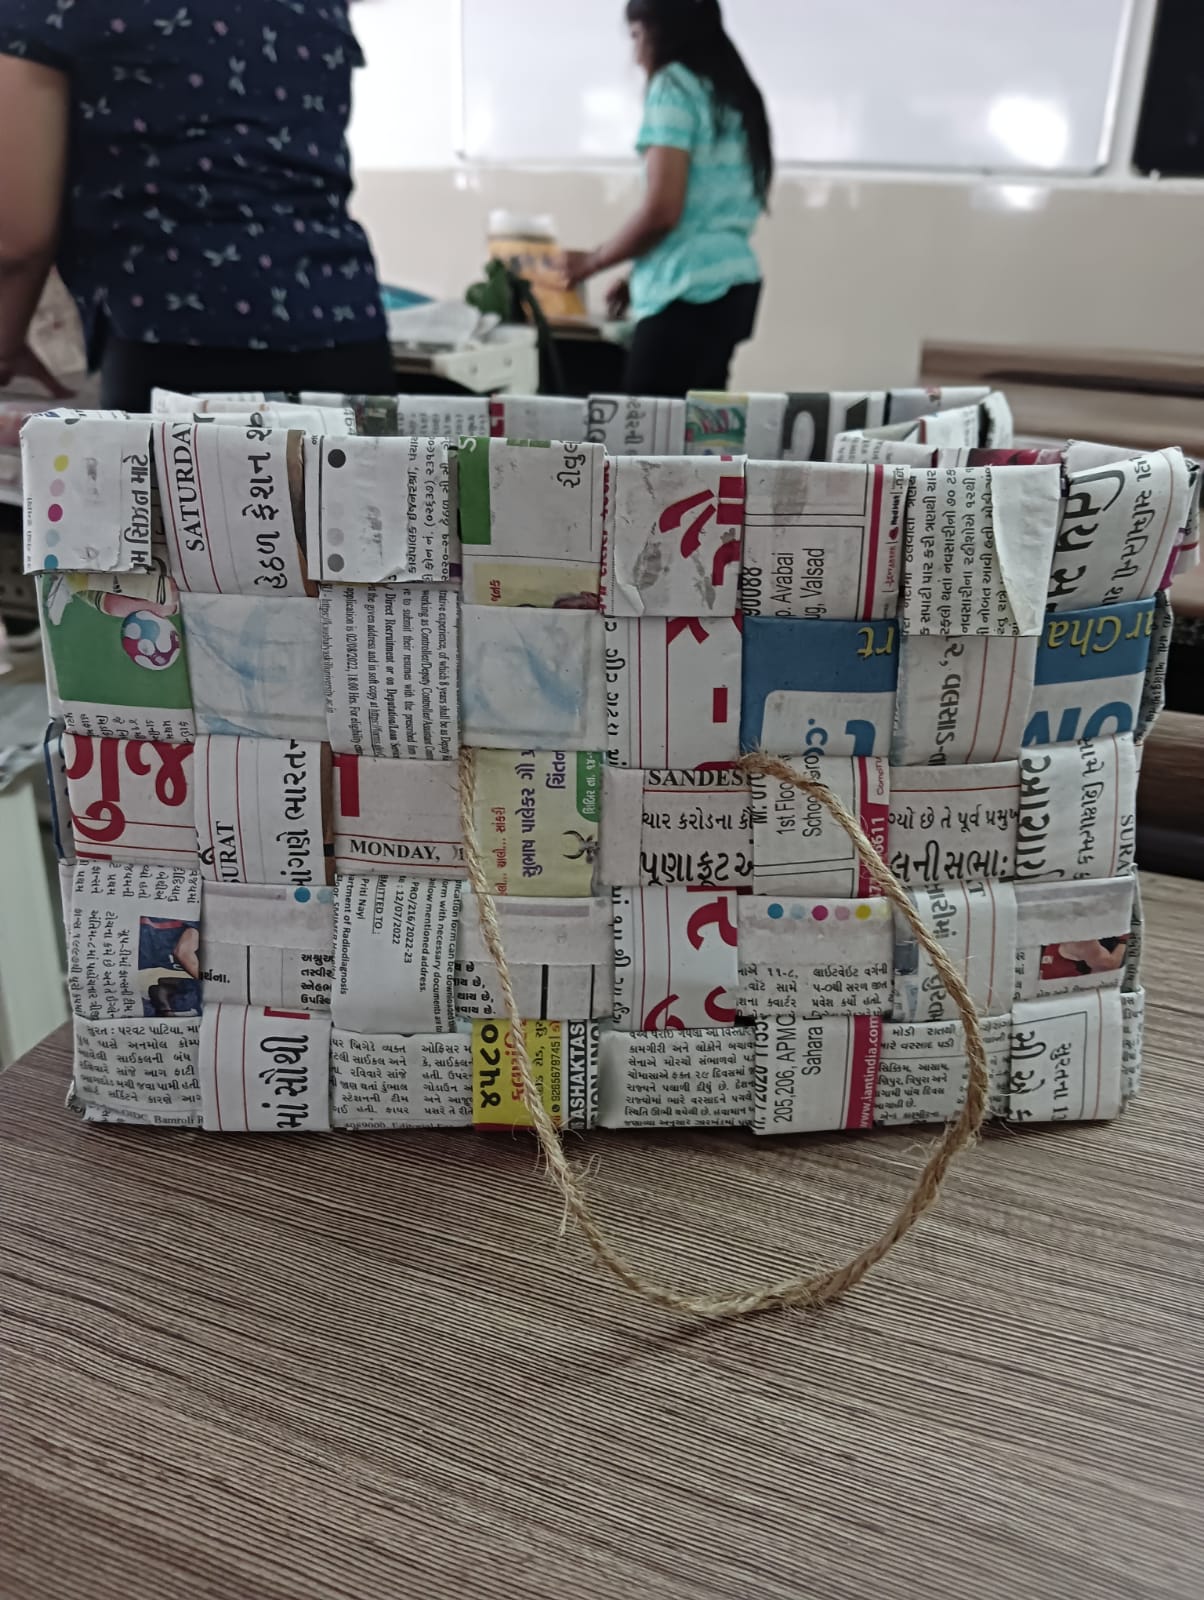 “Environment Conservation Activity  (Handbag Making from Newspapers)”